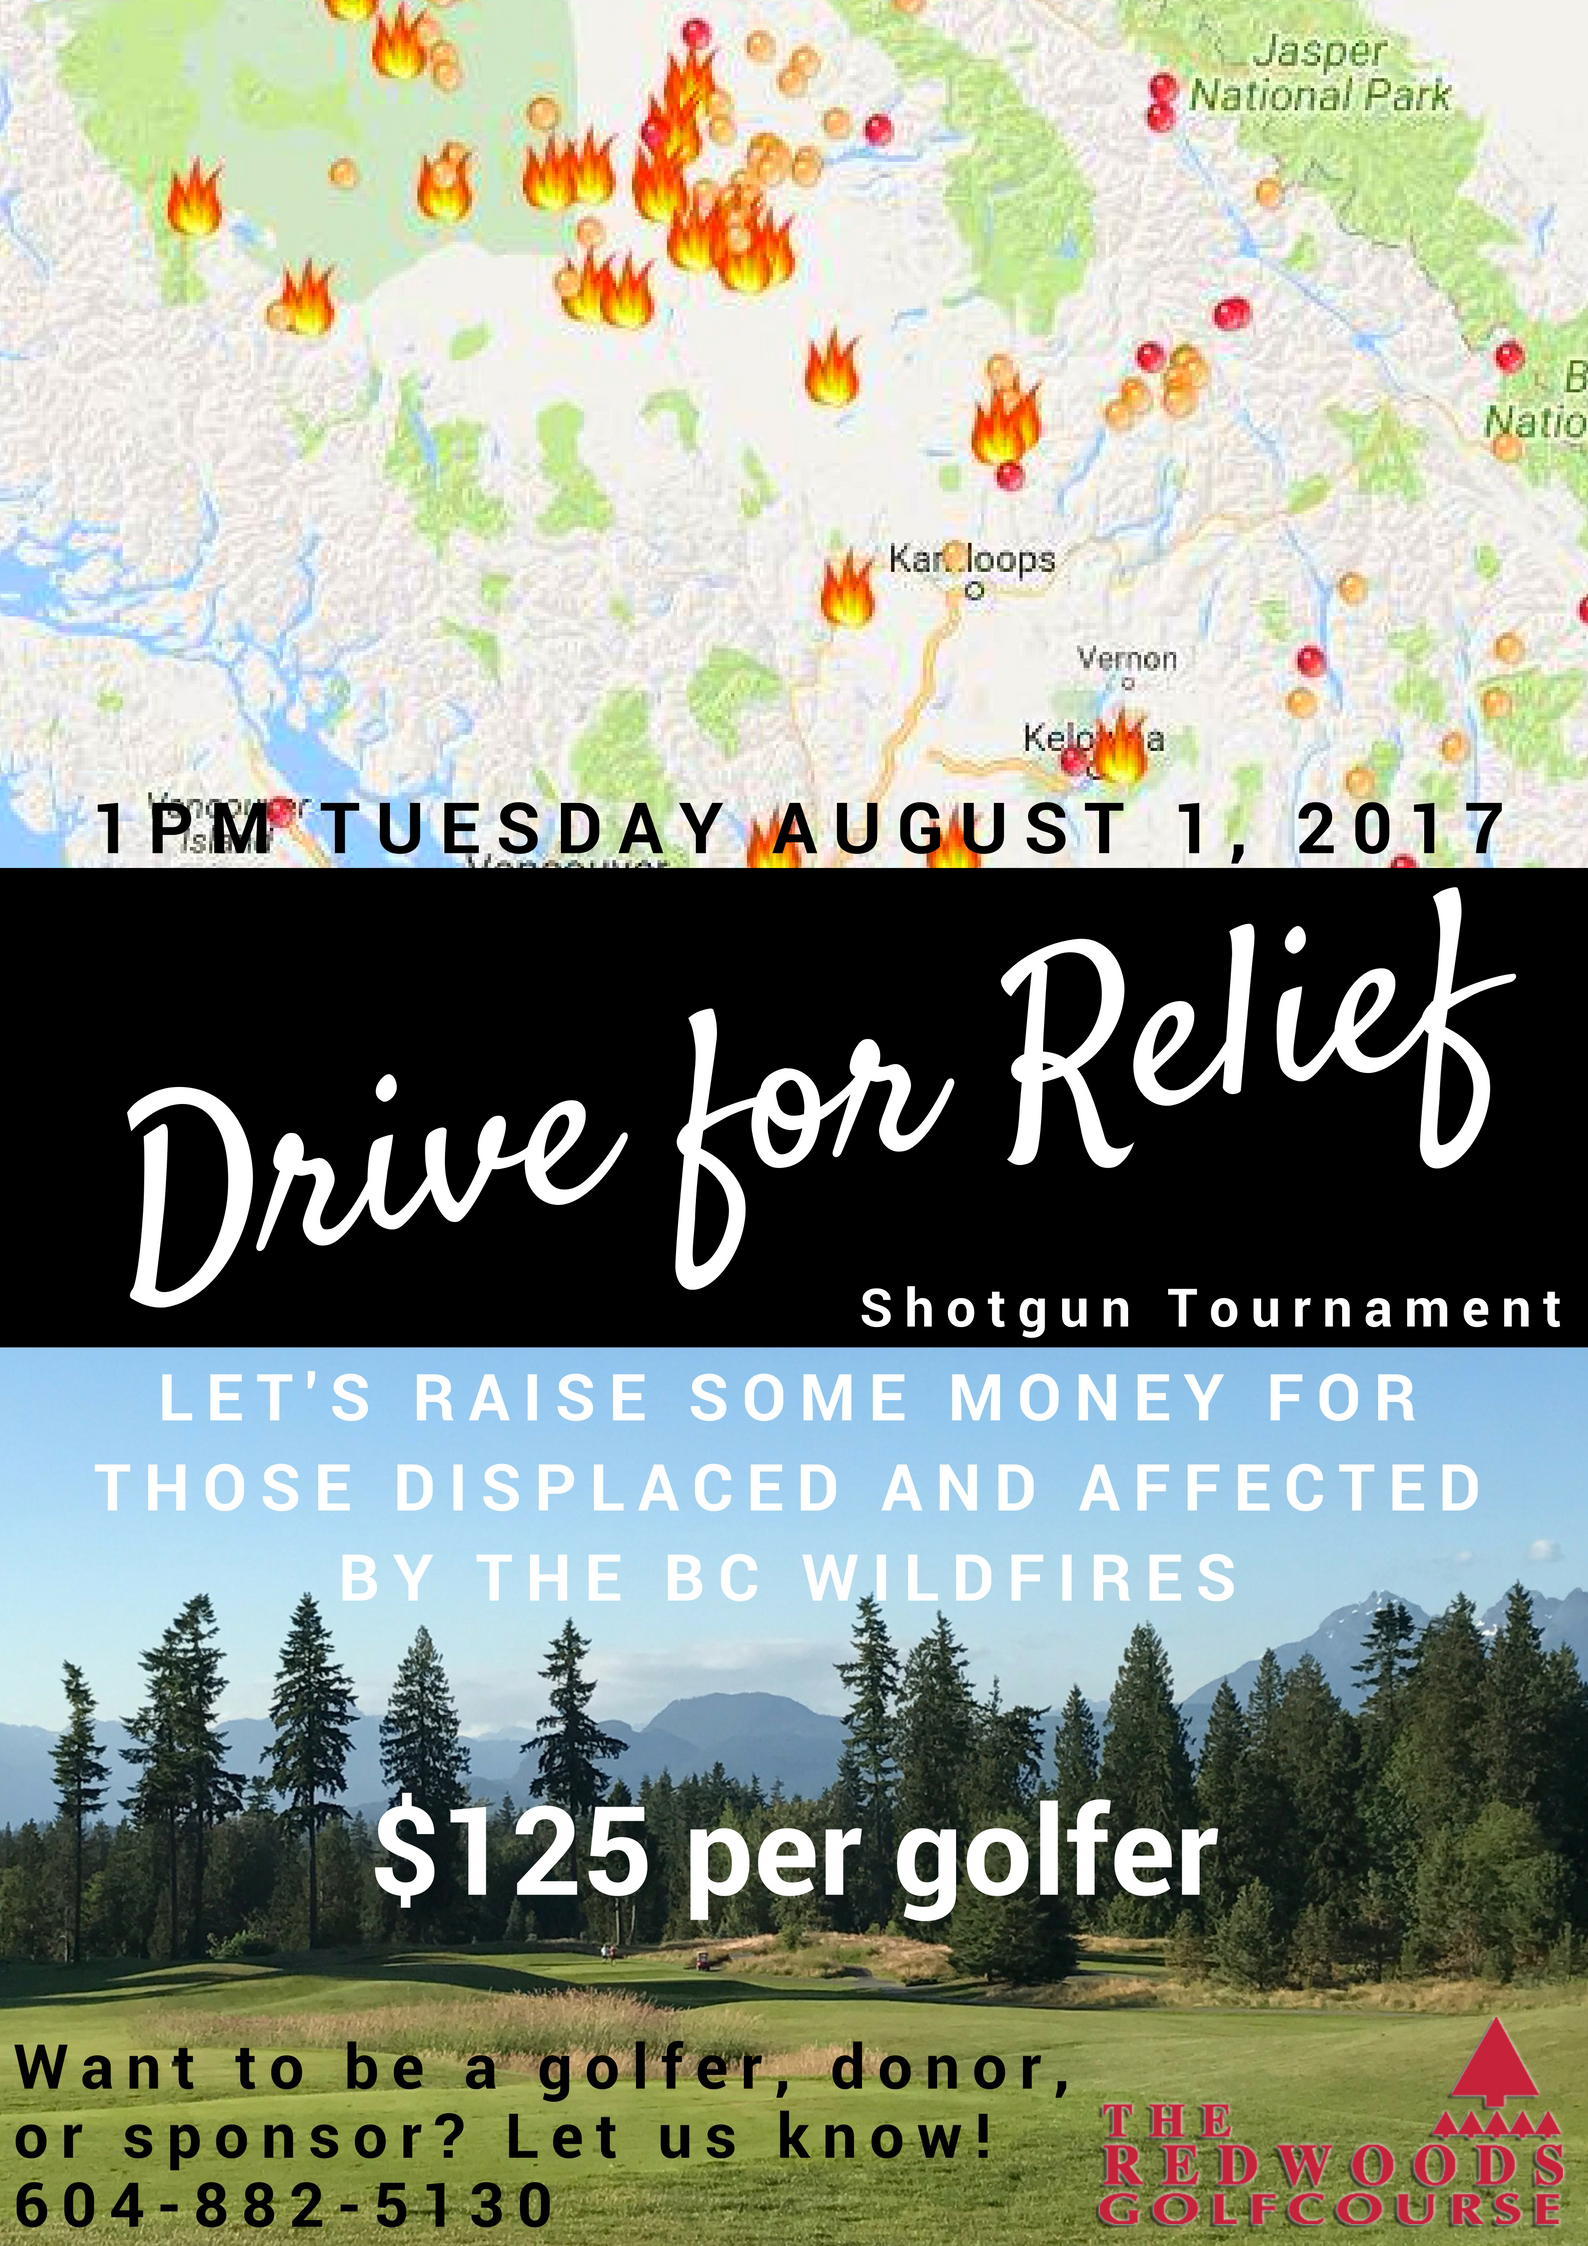 Drive for Relief poster at Redwoods golf course 